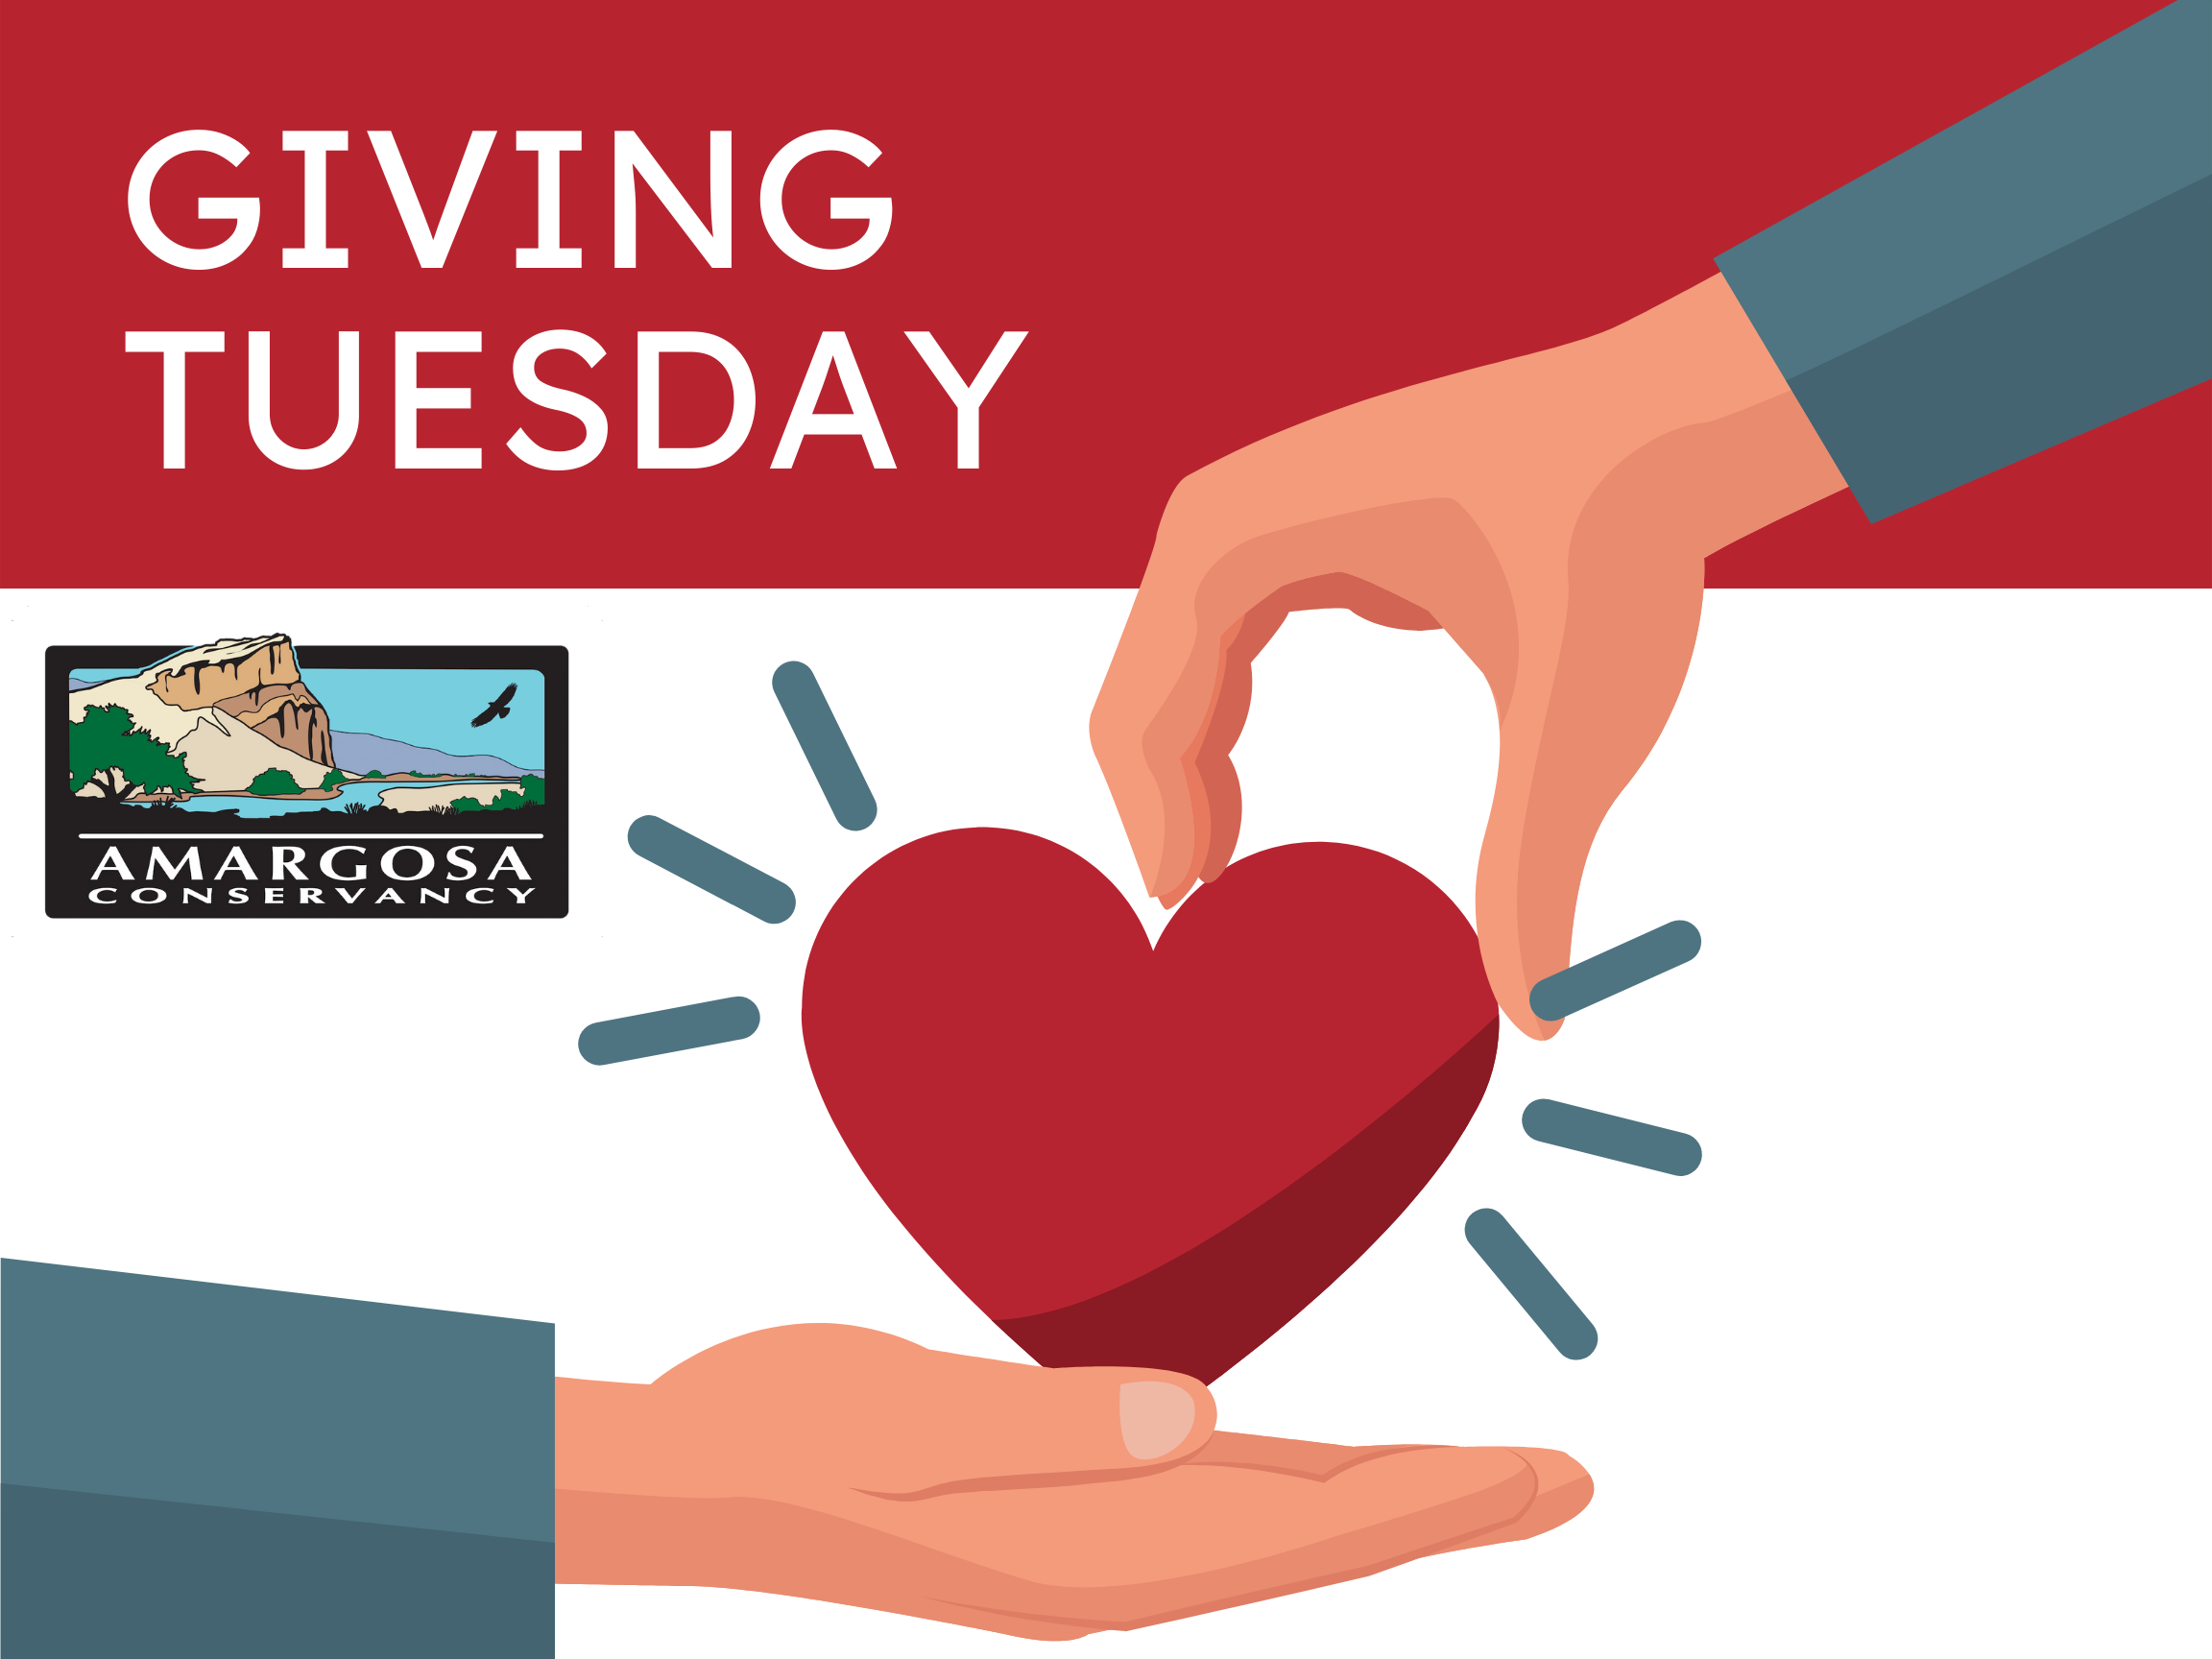 Make the Amargosa Conservancy your choice for Giving Tuesday